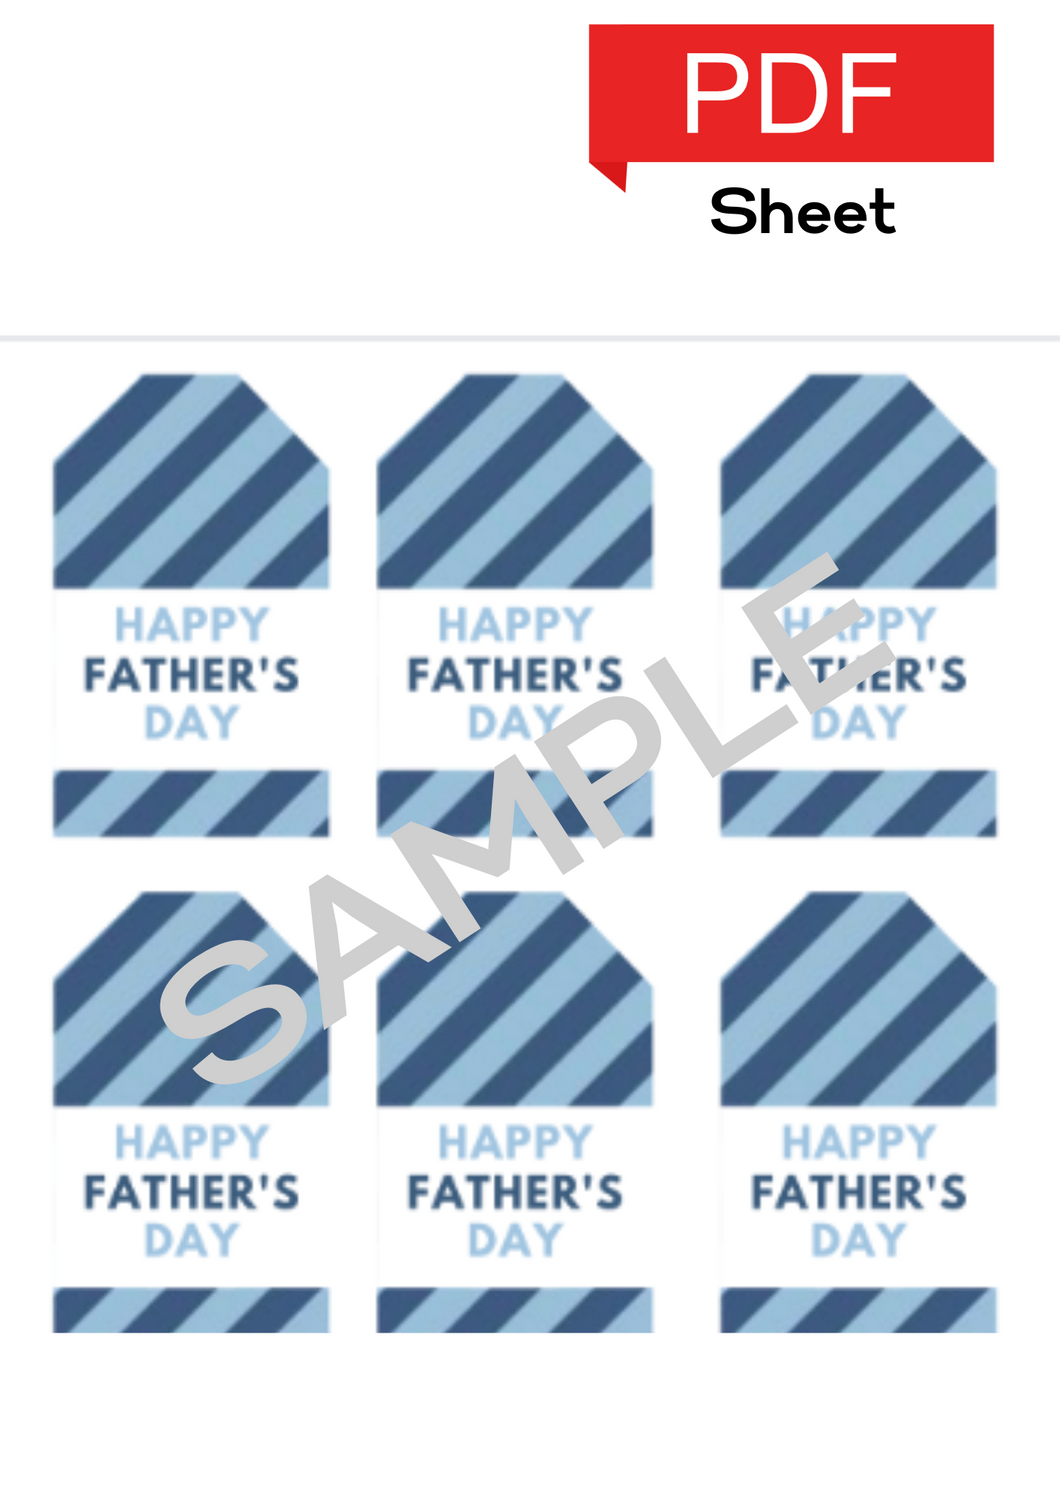 Father's Day Sheet (Blue)